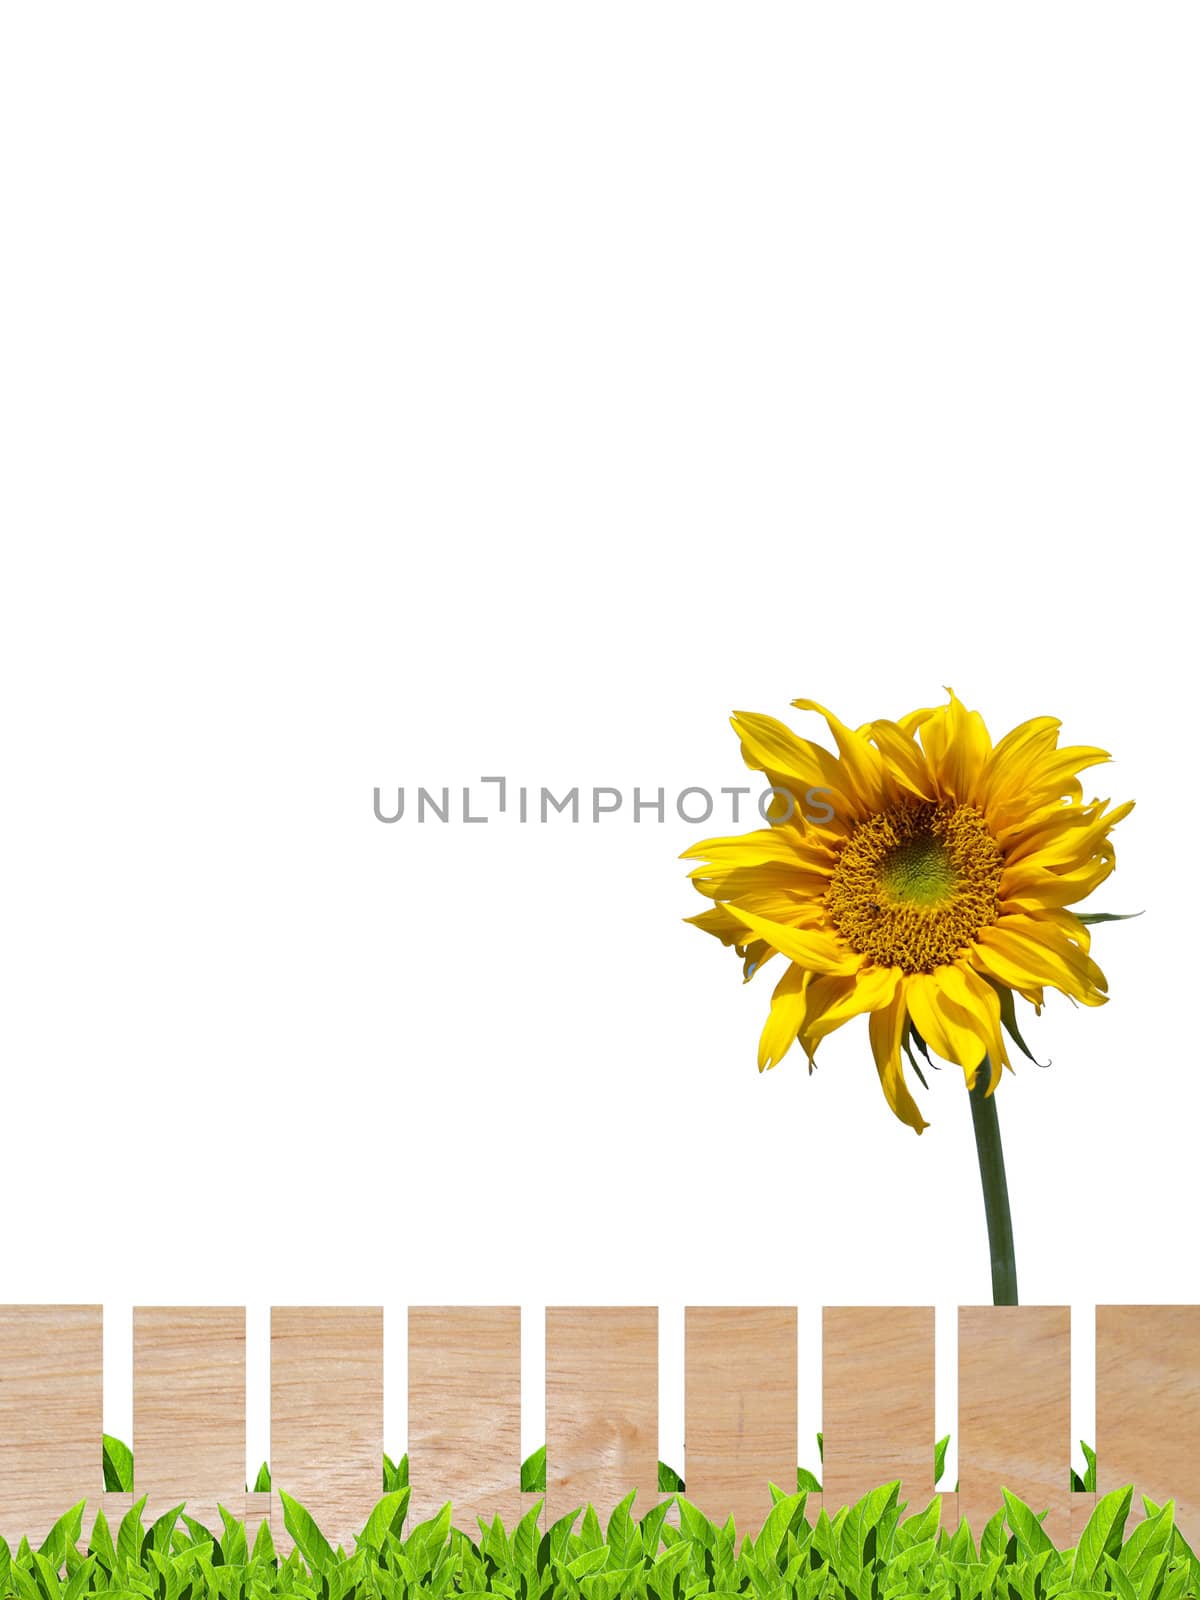 Sunflower and wooden fence by Exsodus